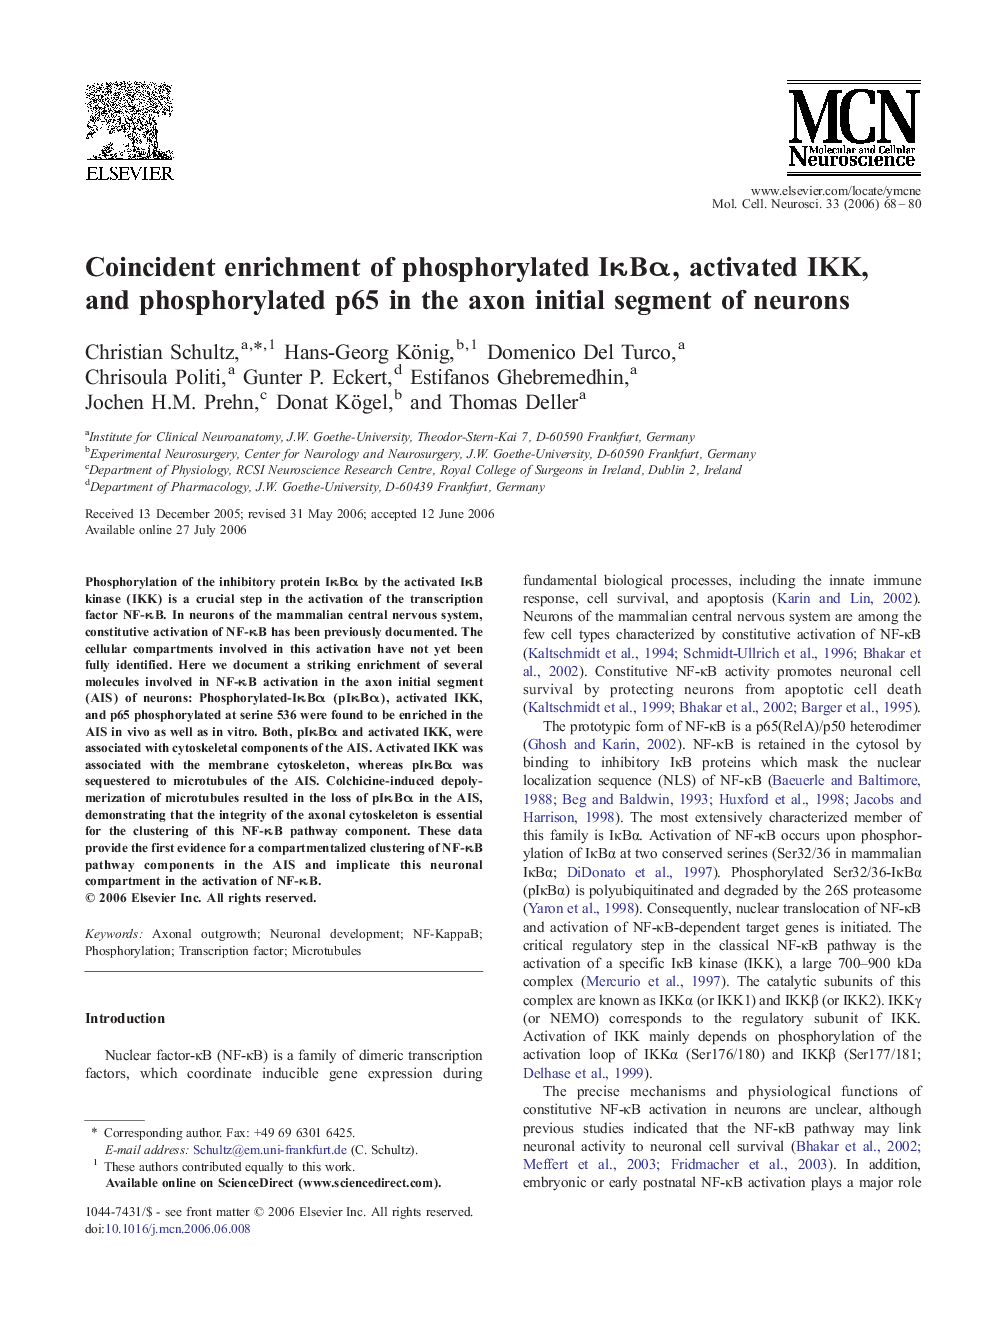 Coincident enrichment of phosphorylated IÎºBÎ±, activated IKK, and phosphorylated p65 in the axon initial segment of neurons